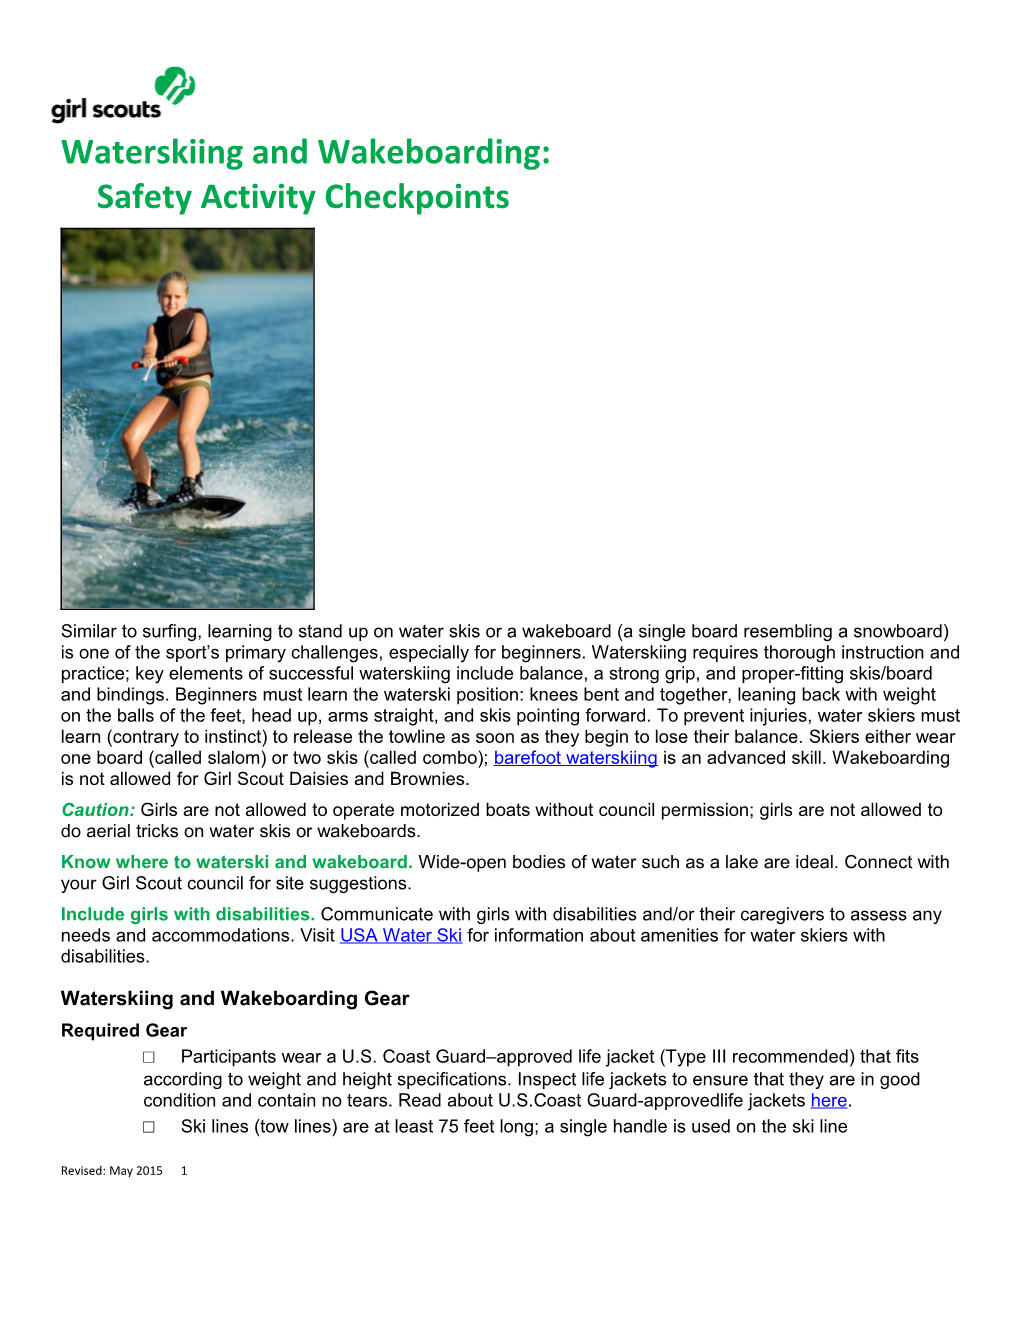 Safety Activity Checkpoints